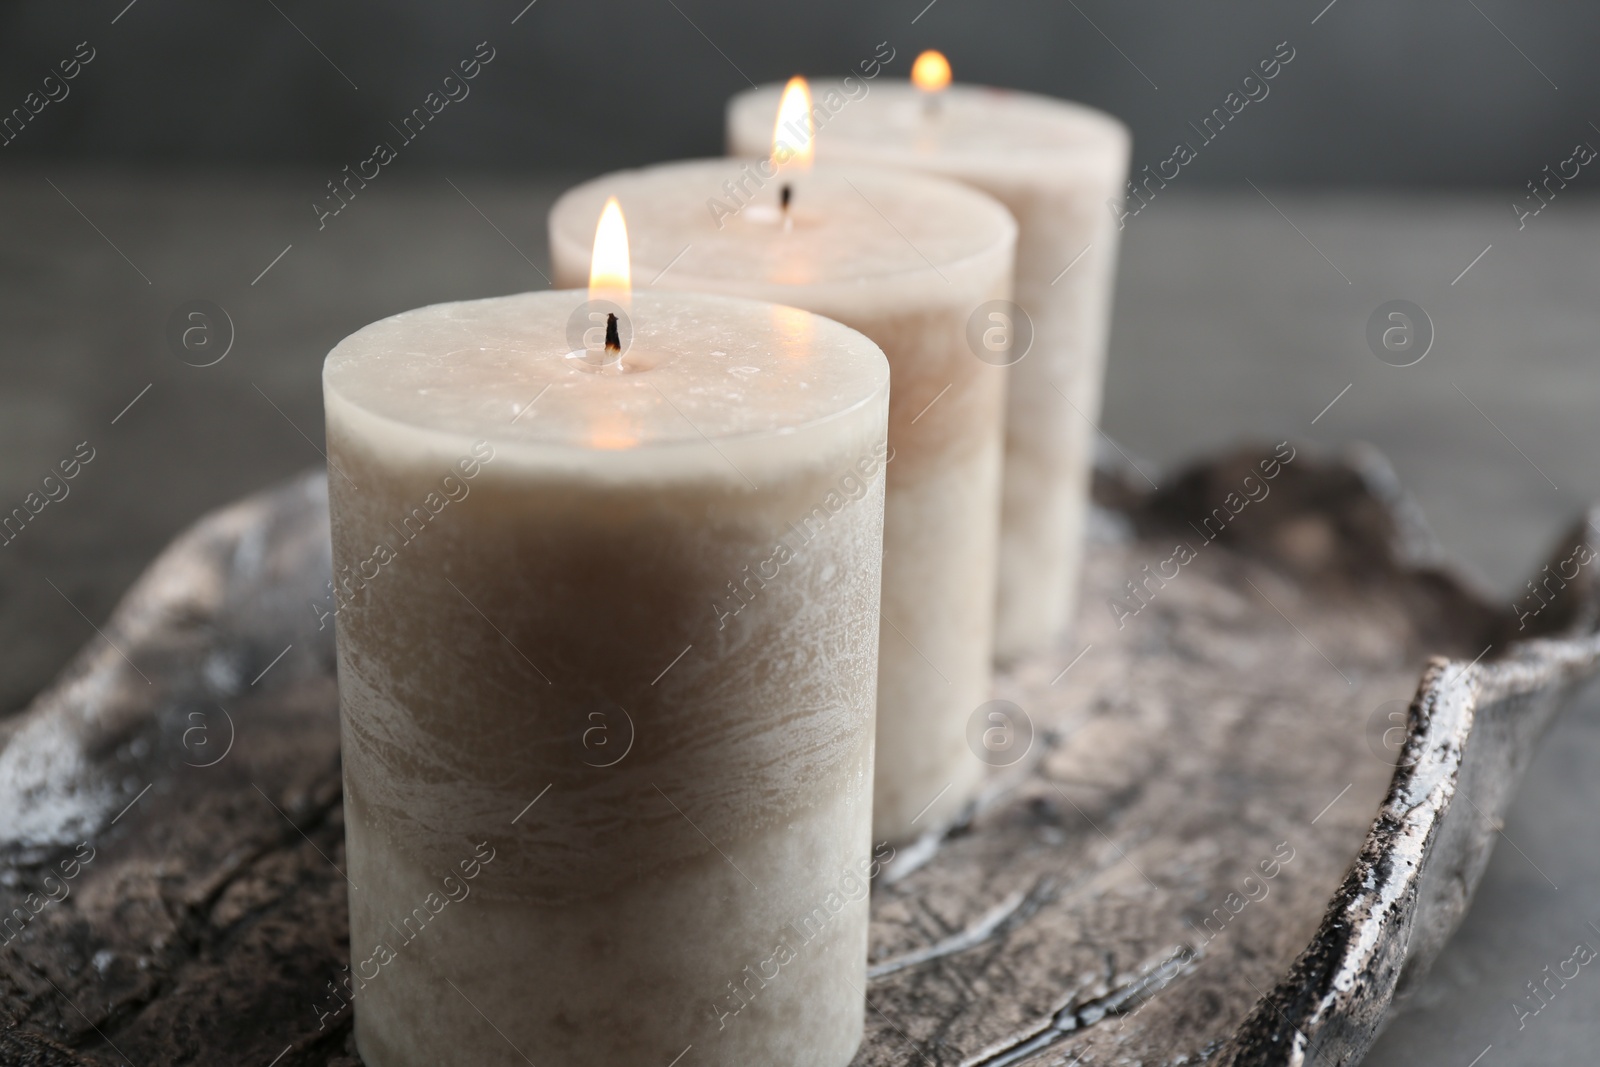 Photo of Tray with three burning candles on table